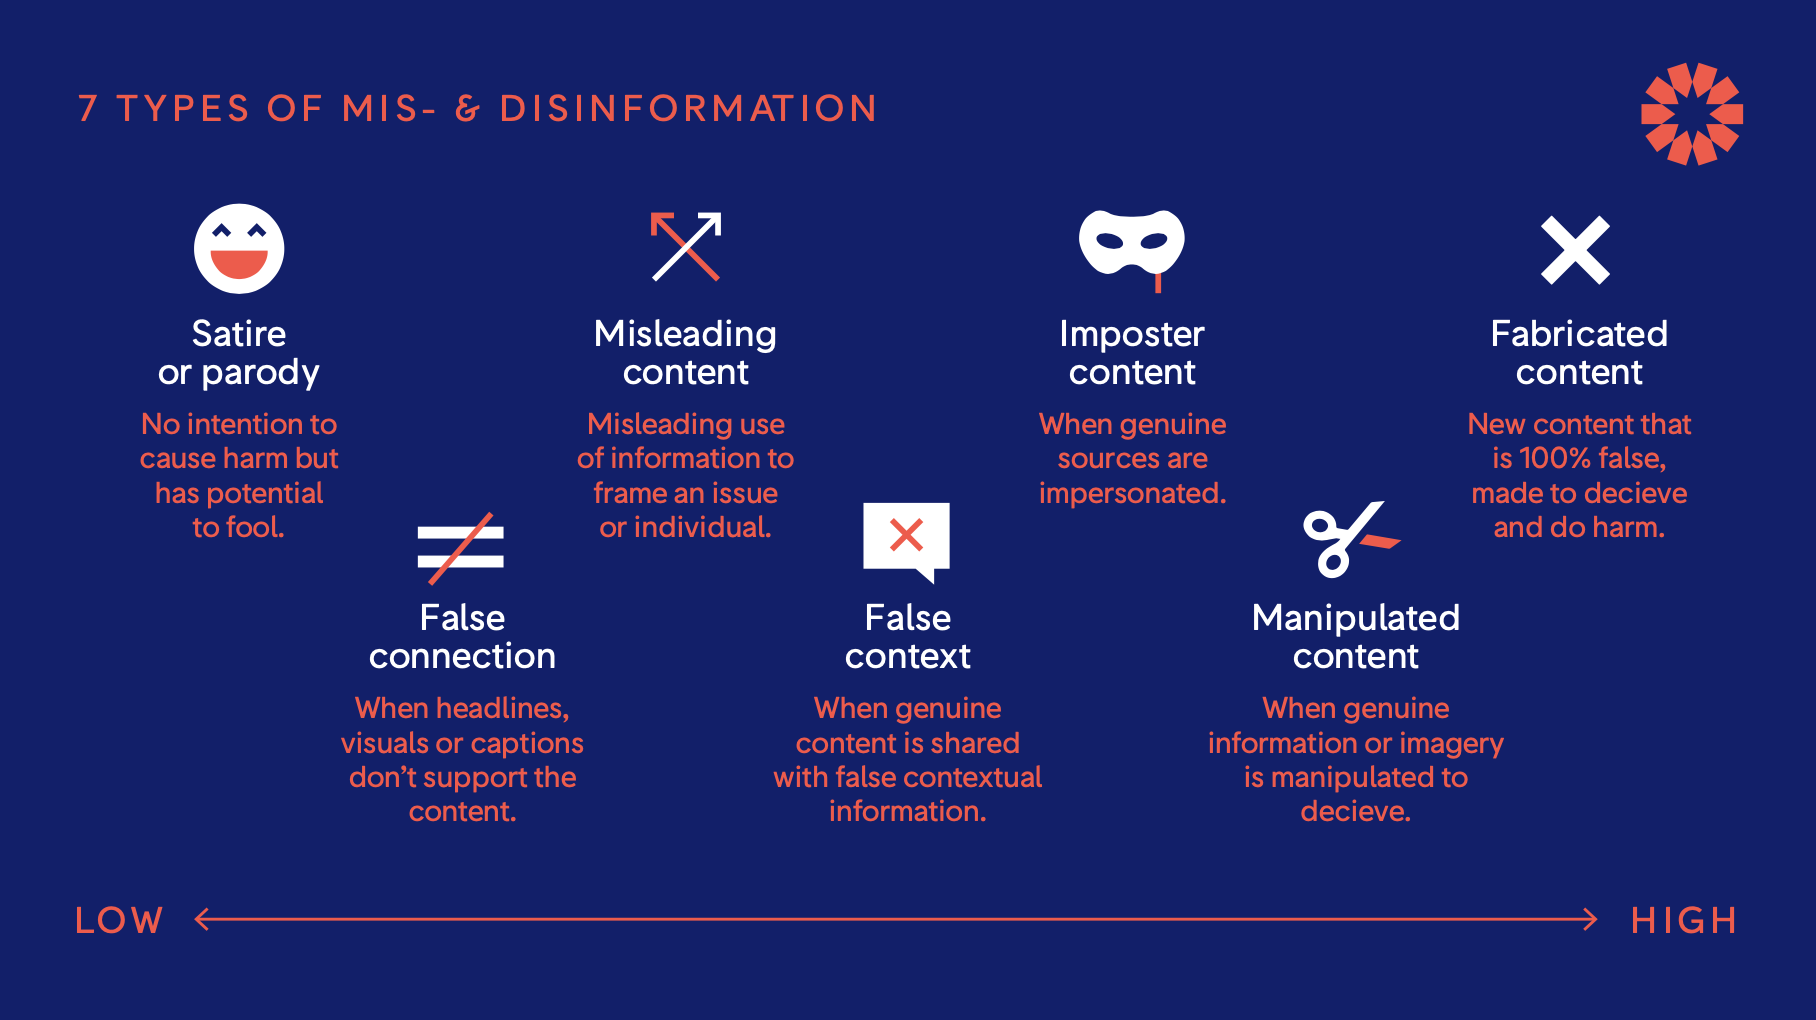 Infographic showing 7 types of mis- and disinformation, on the scale from low to high intent to cause harm: satire or parody; false connection; misleading content; false context; impostor content; manipulated content; fabricated content